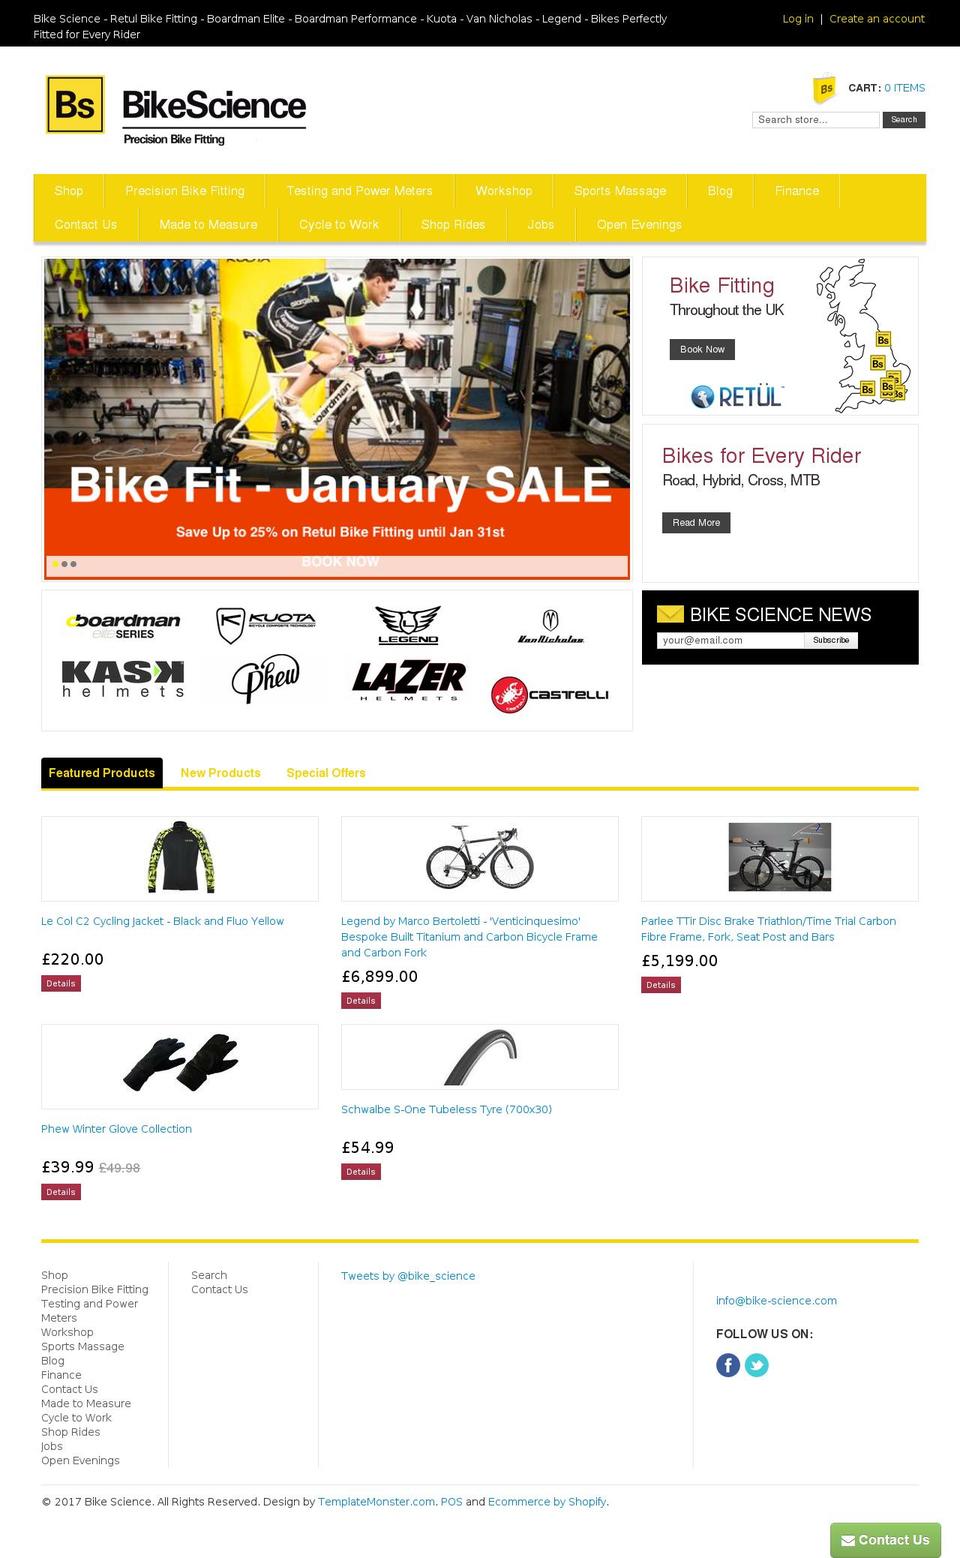 Craft Shopify theme site example bike-science.com